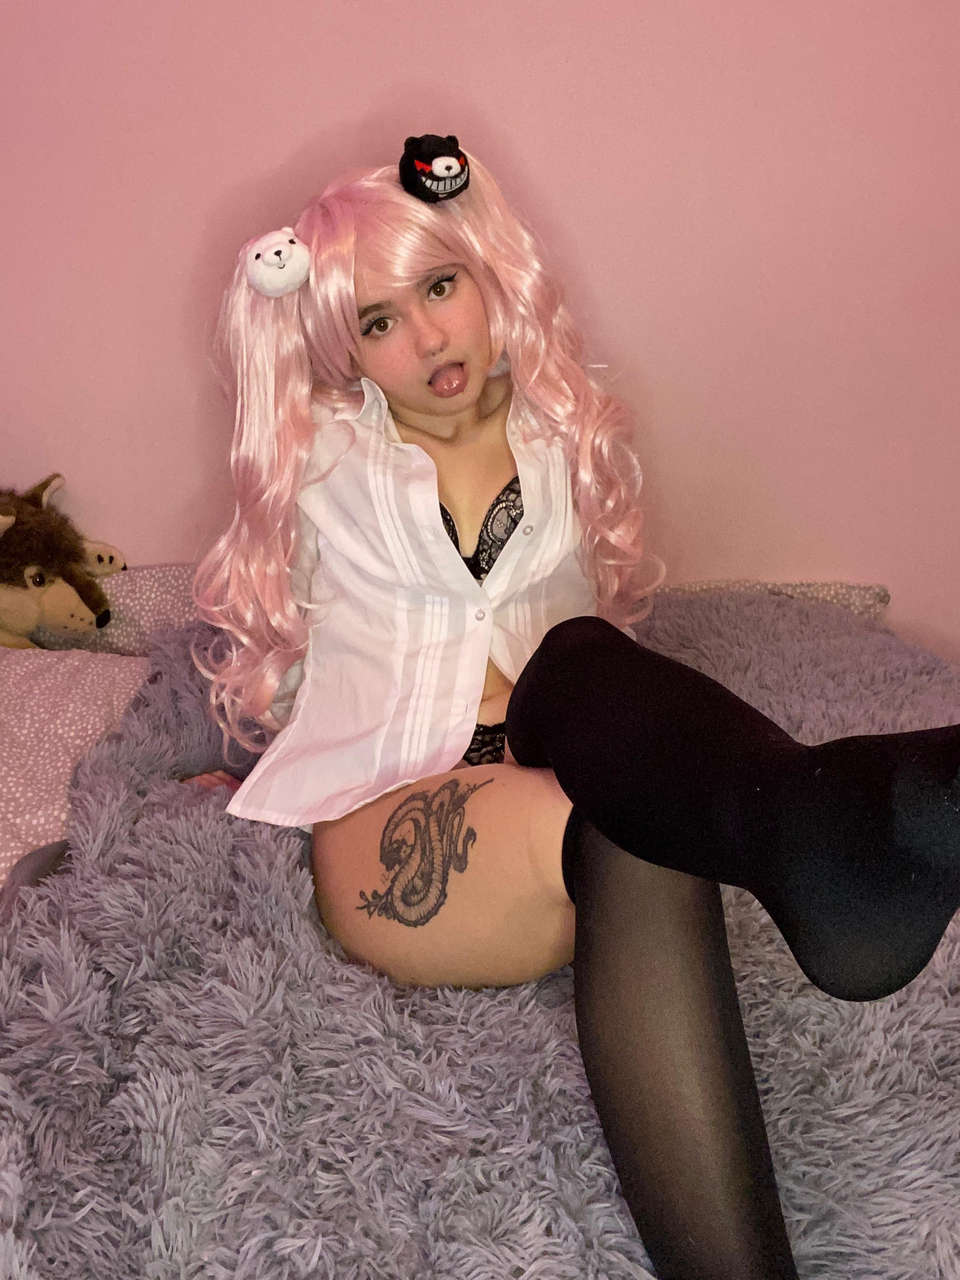 Some More Junko Enoshima Cosplay By Mysel